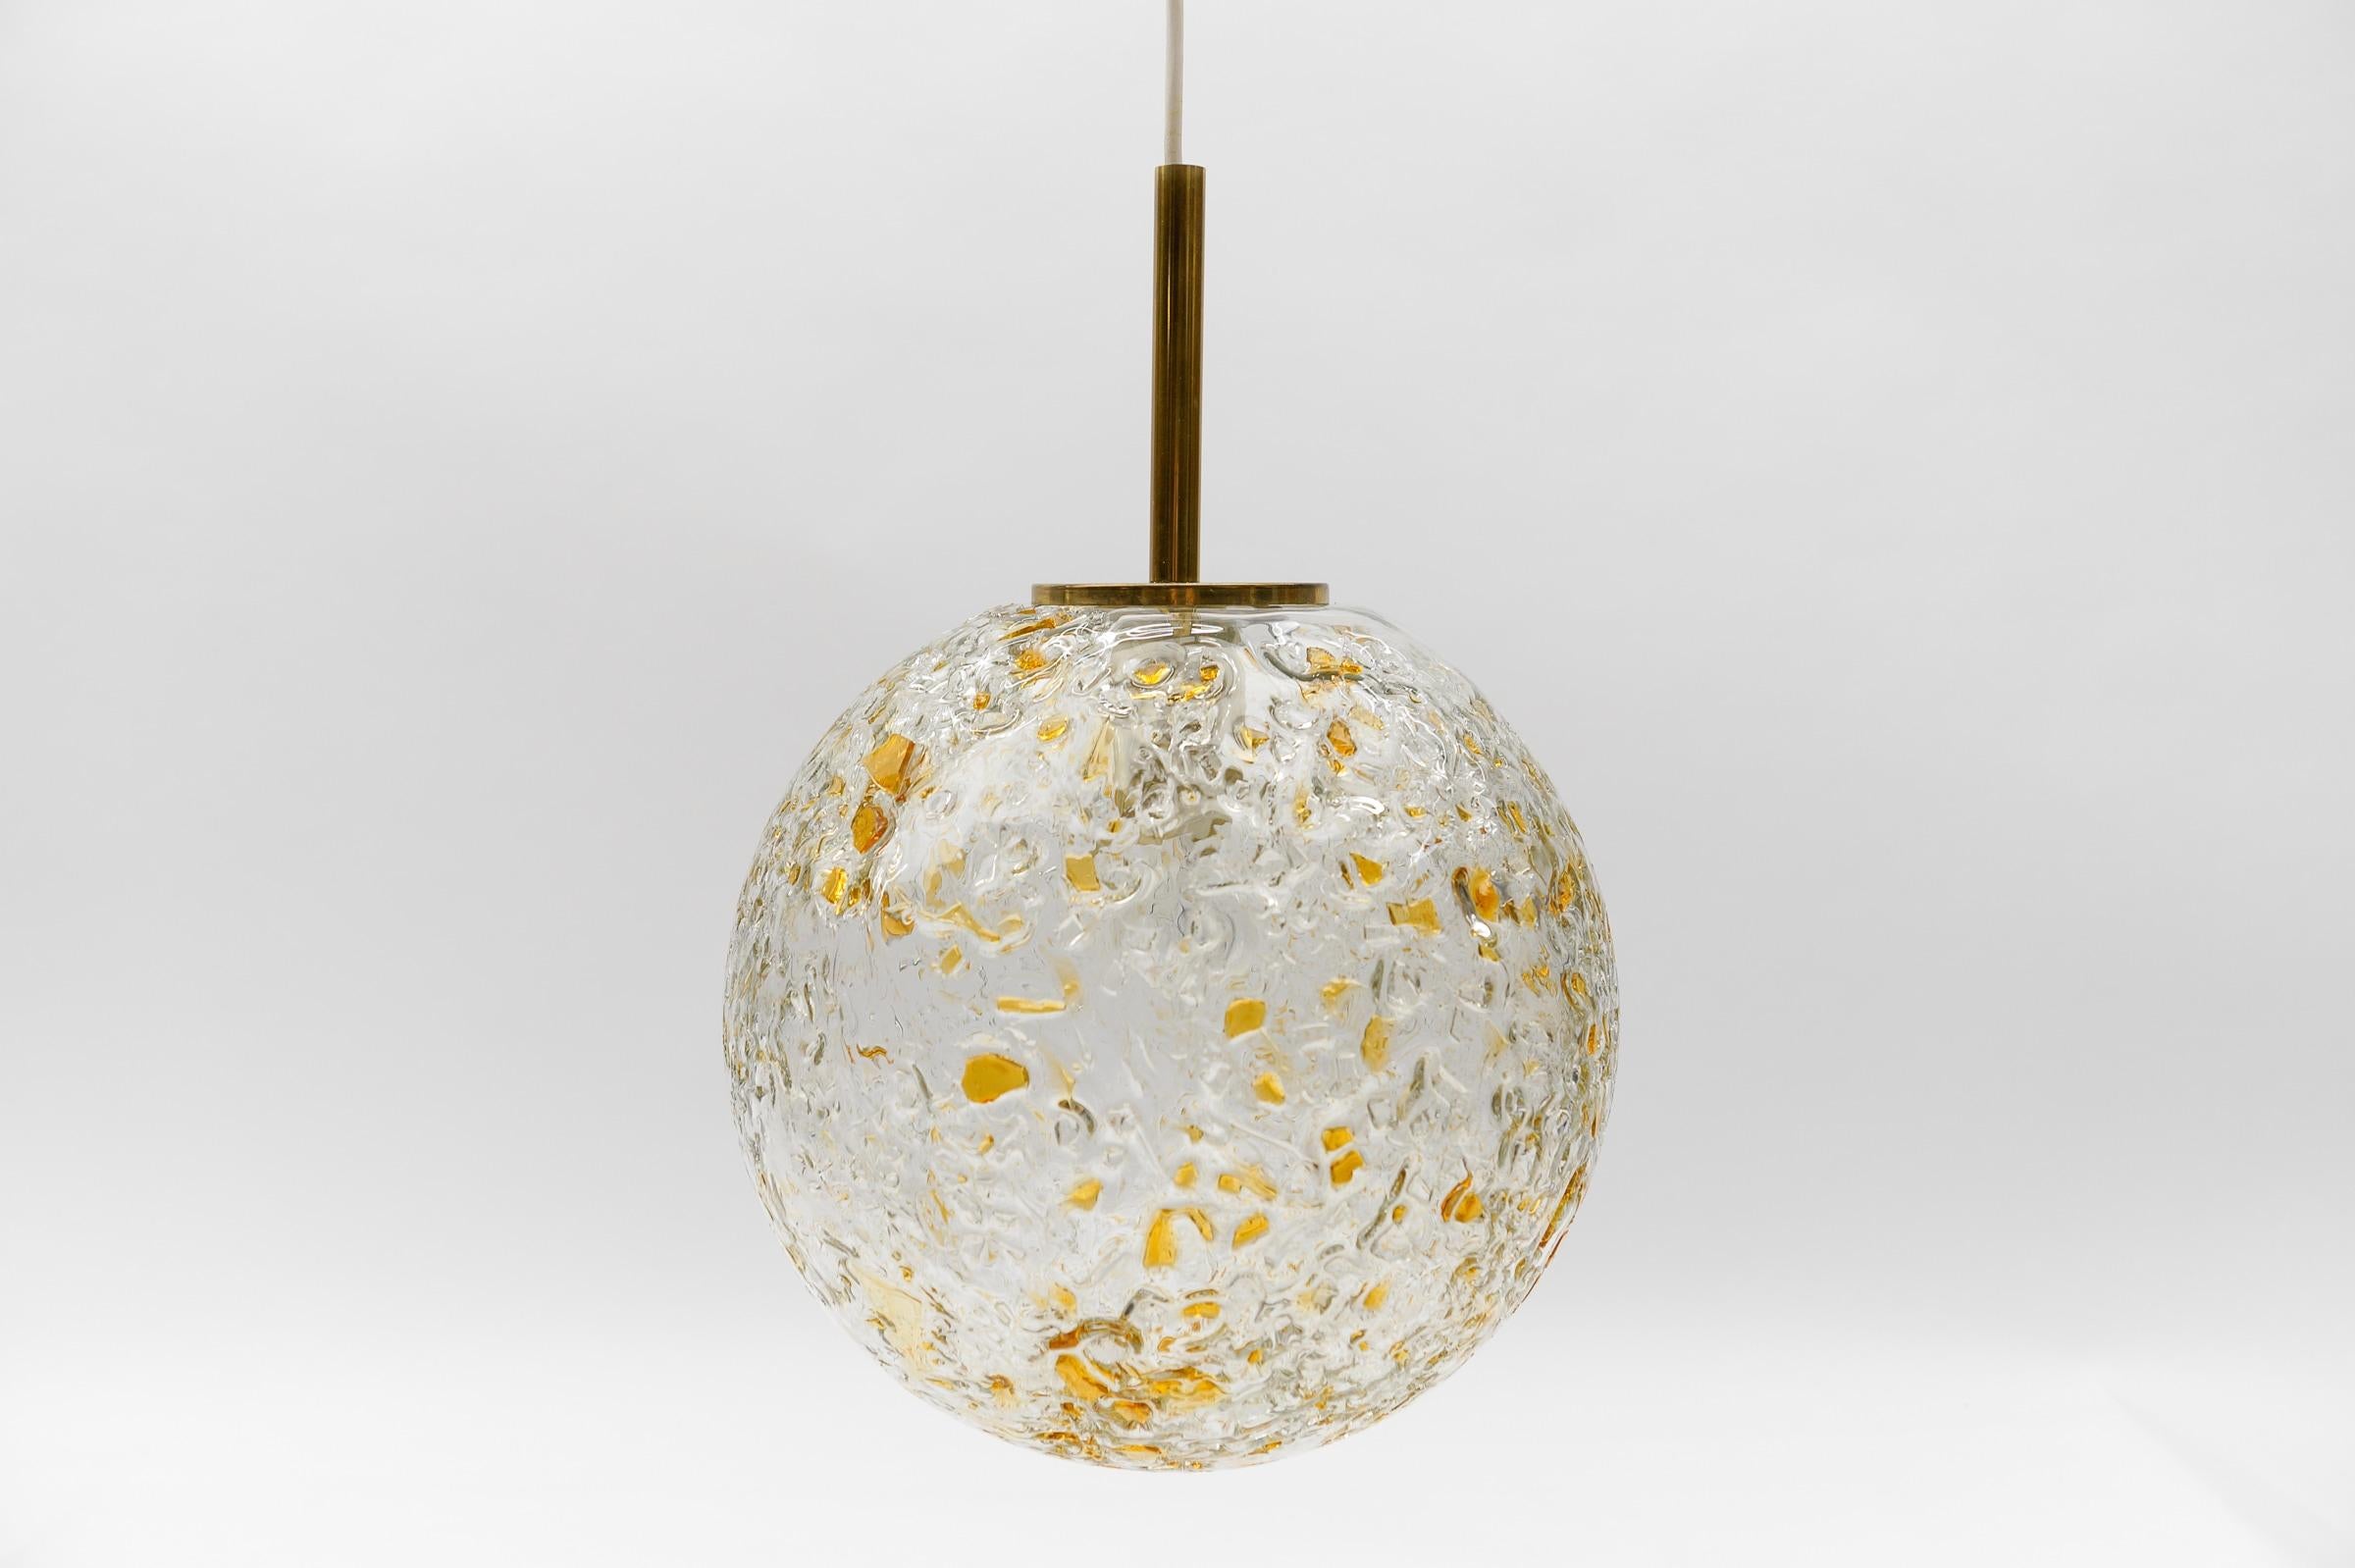 Mid-20th Century Lovely Mid-Century Modern Glass Ball Pendant Lamp by Doria, 1960s Germany For Sale